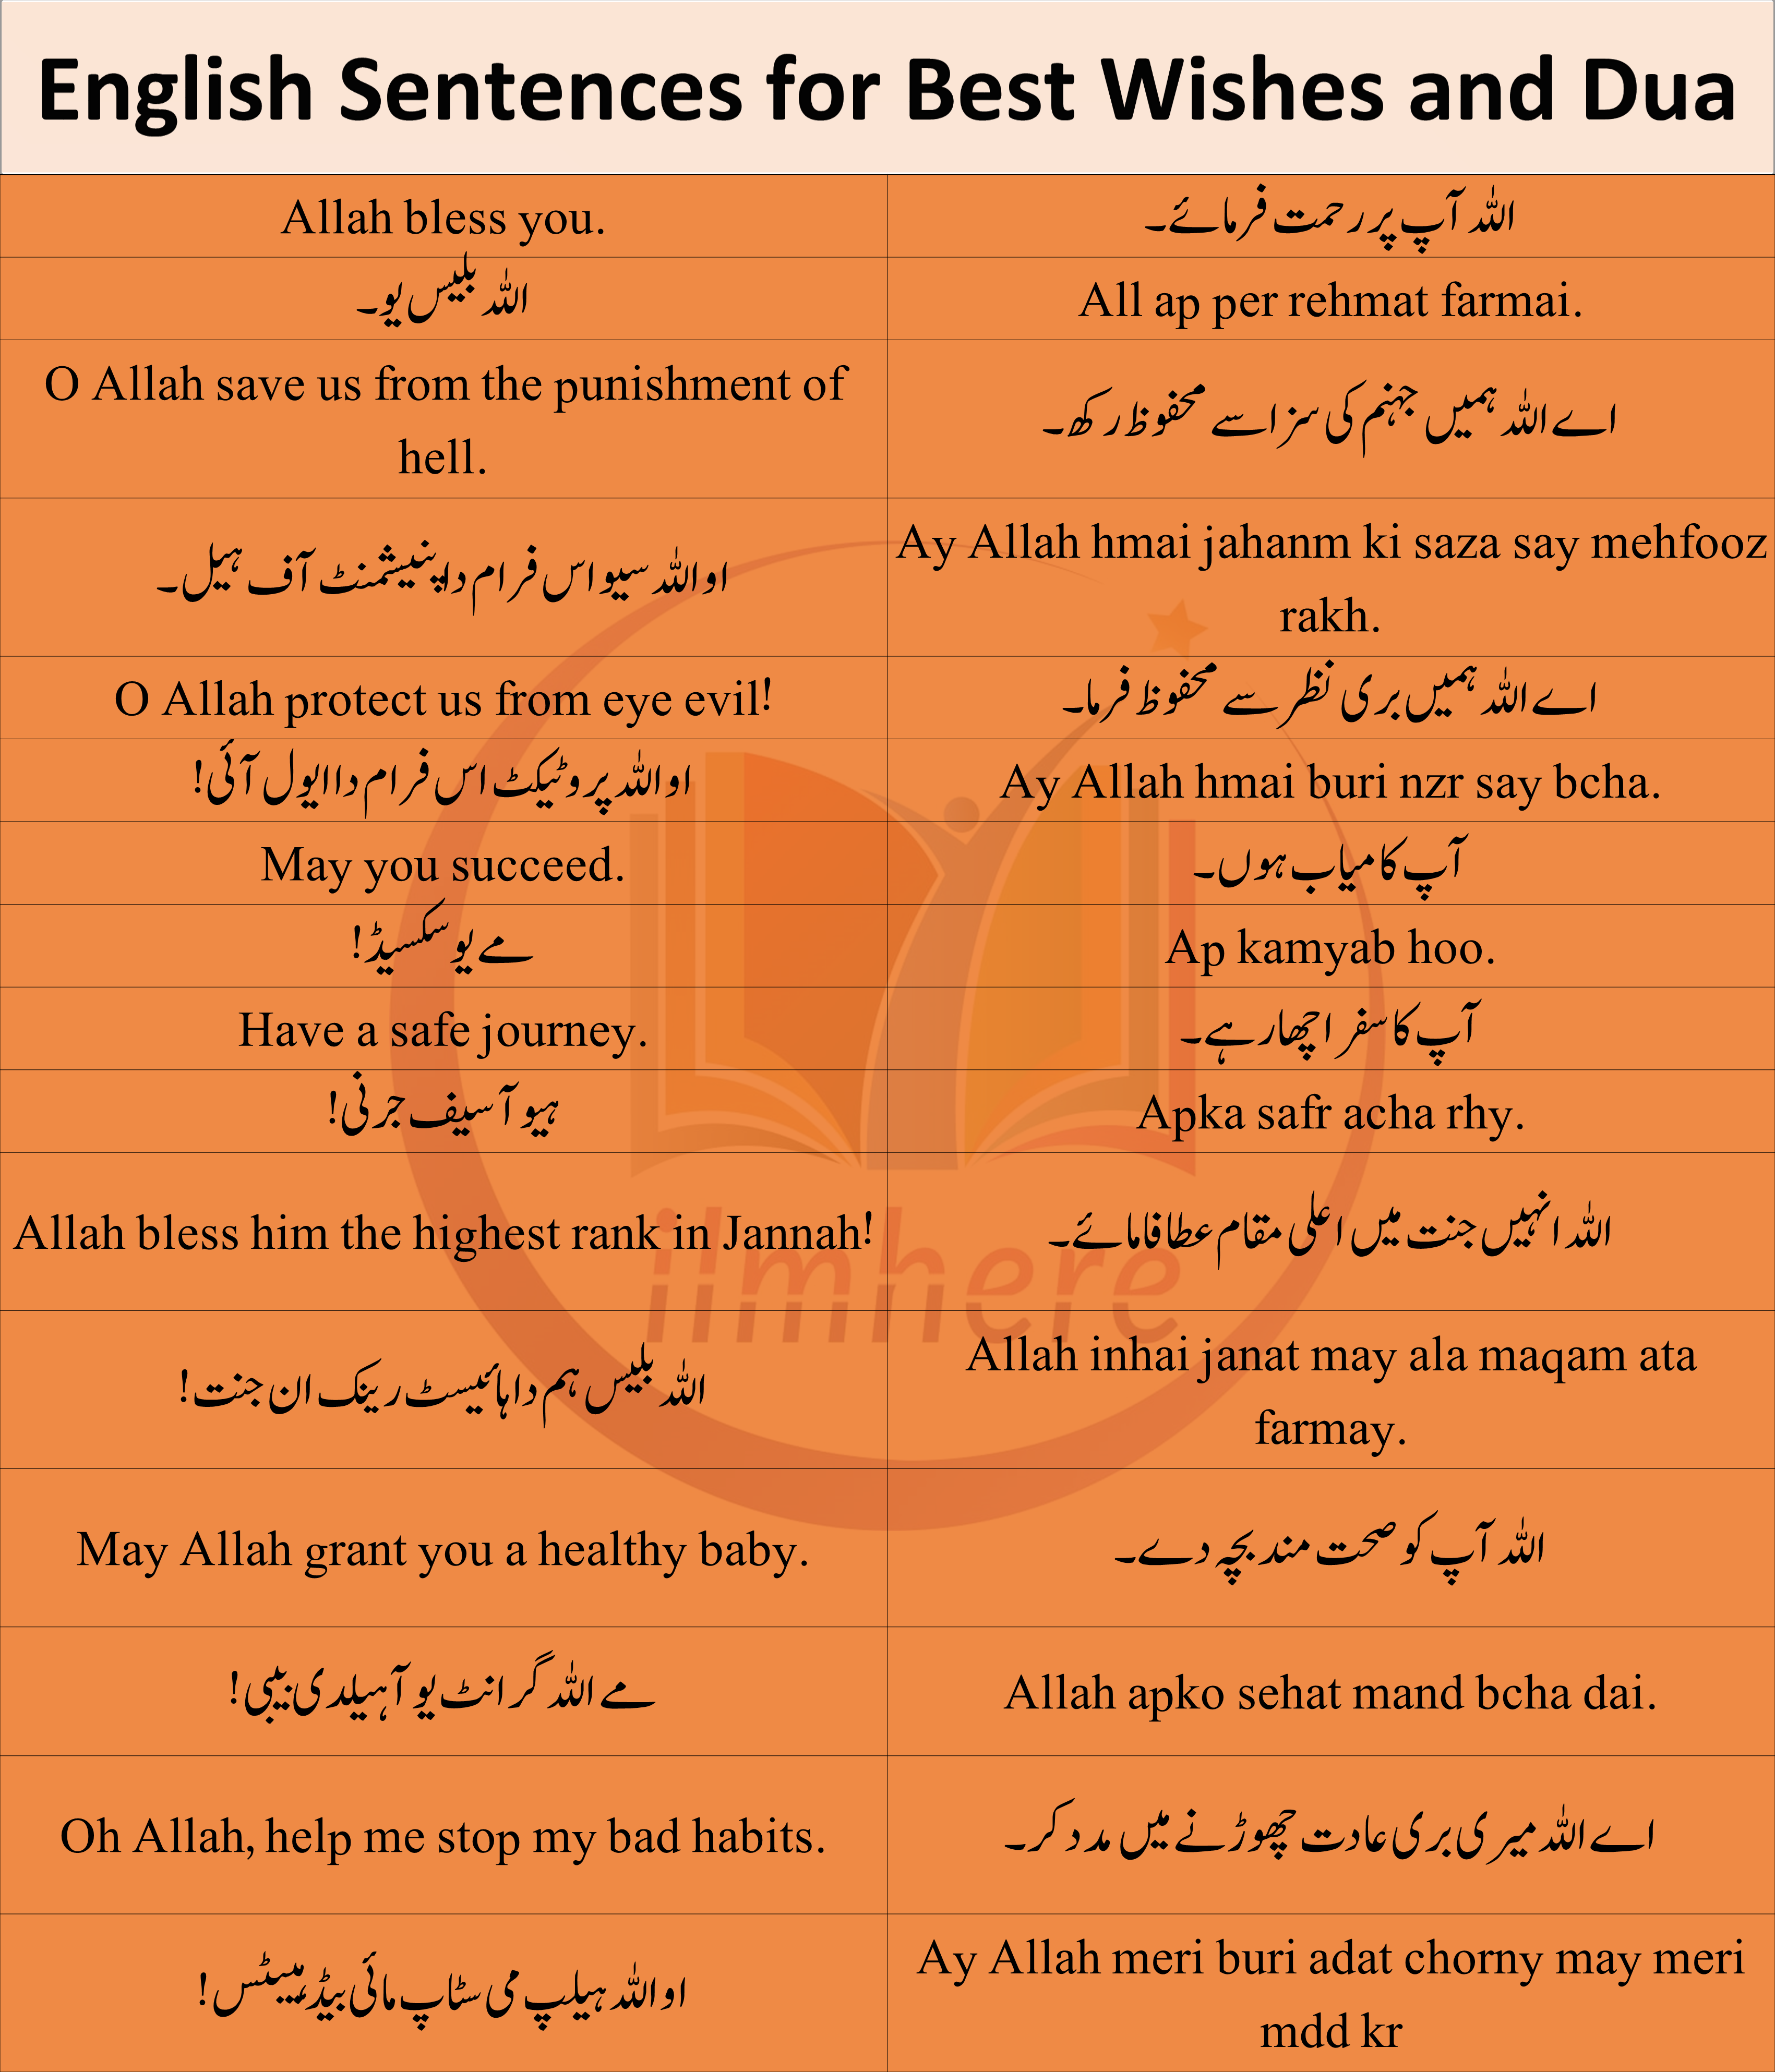 English Sentences for Best Wishes and Dua In Urdu and Hindi